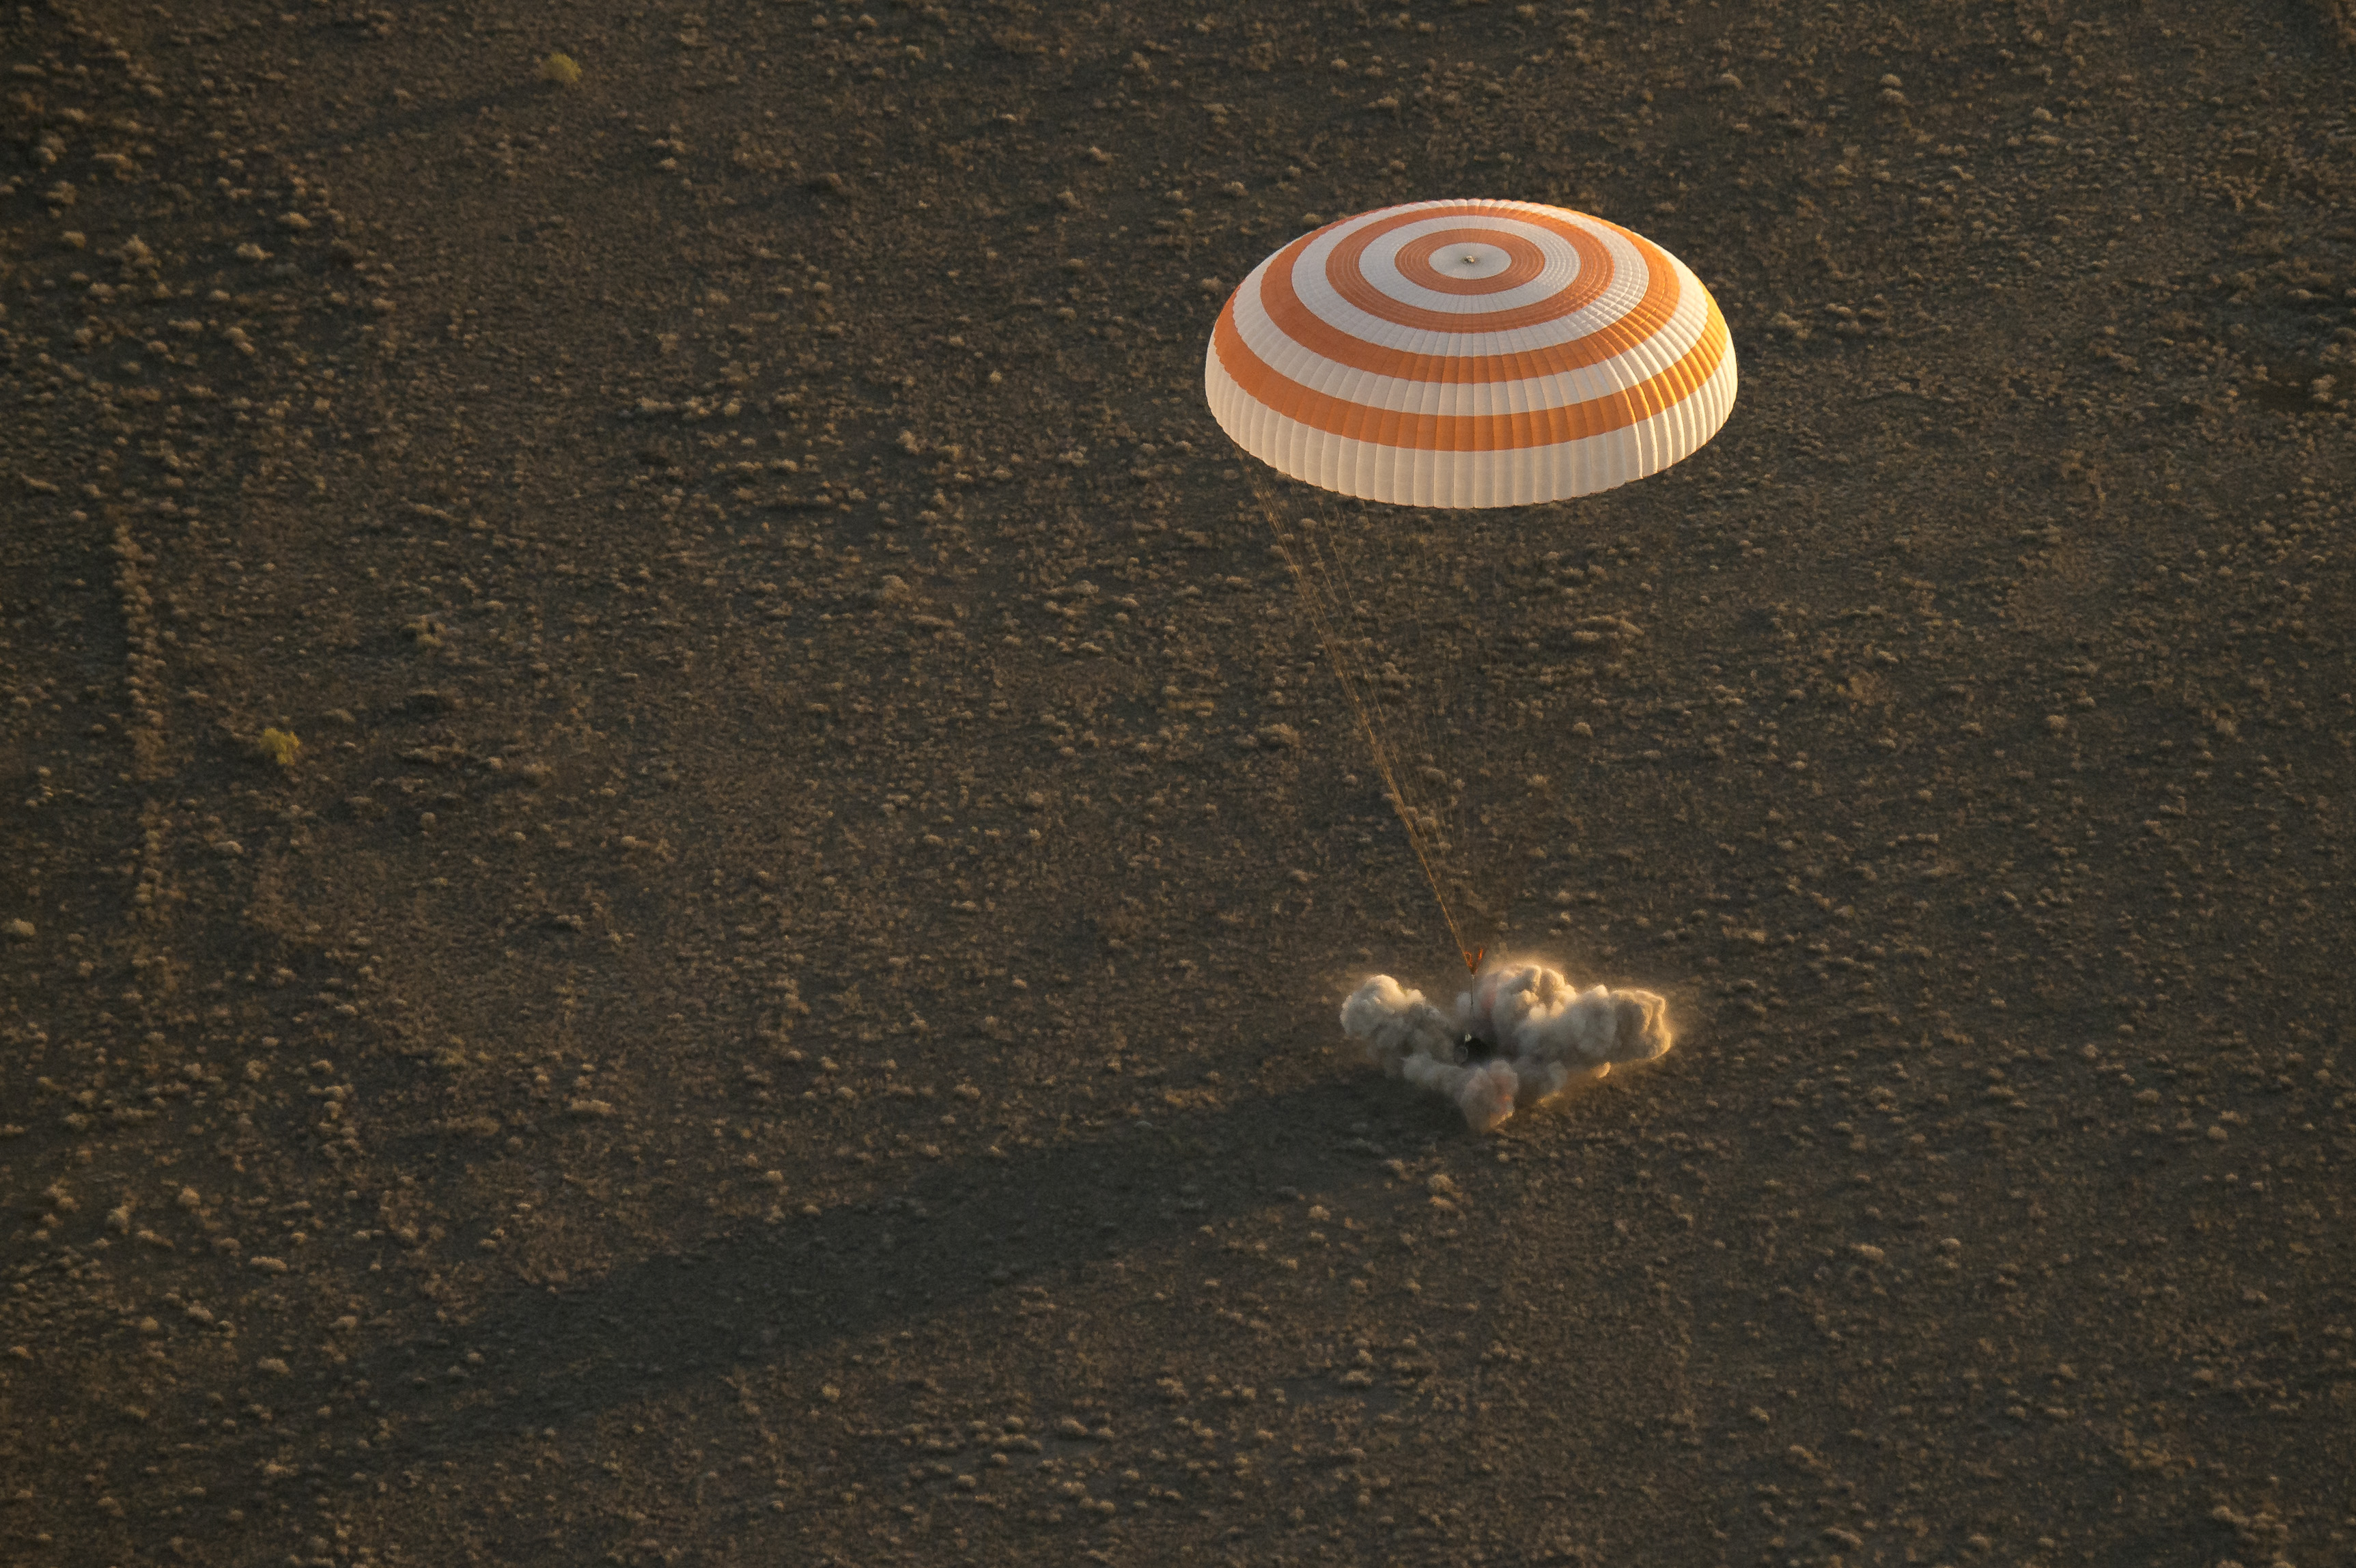 Record-Setting Astronaut Lands with Two Cosmonauts from Space Station